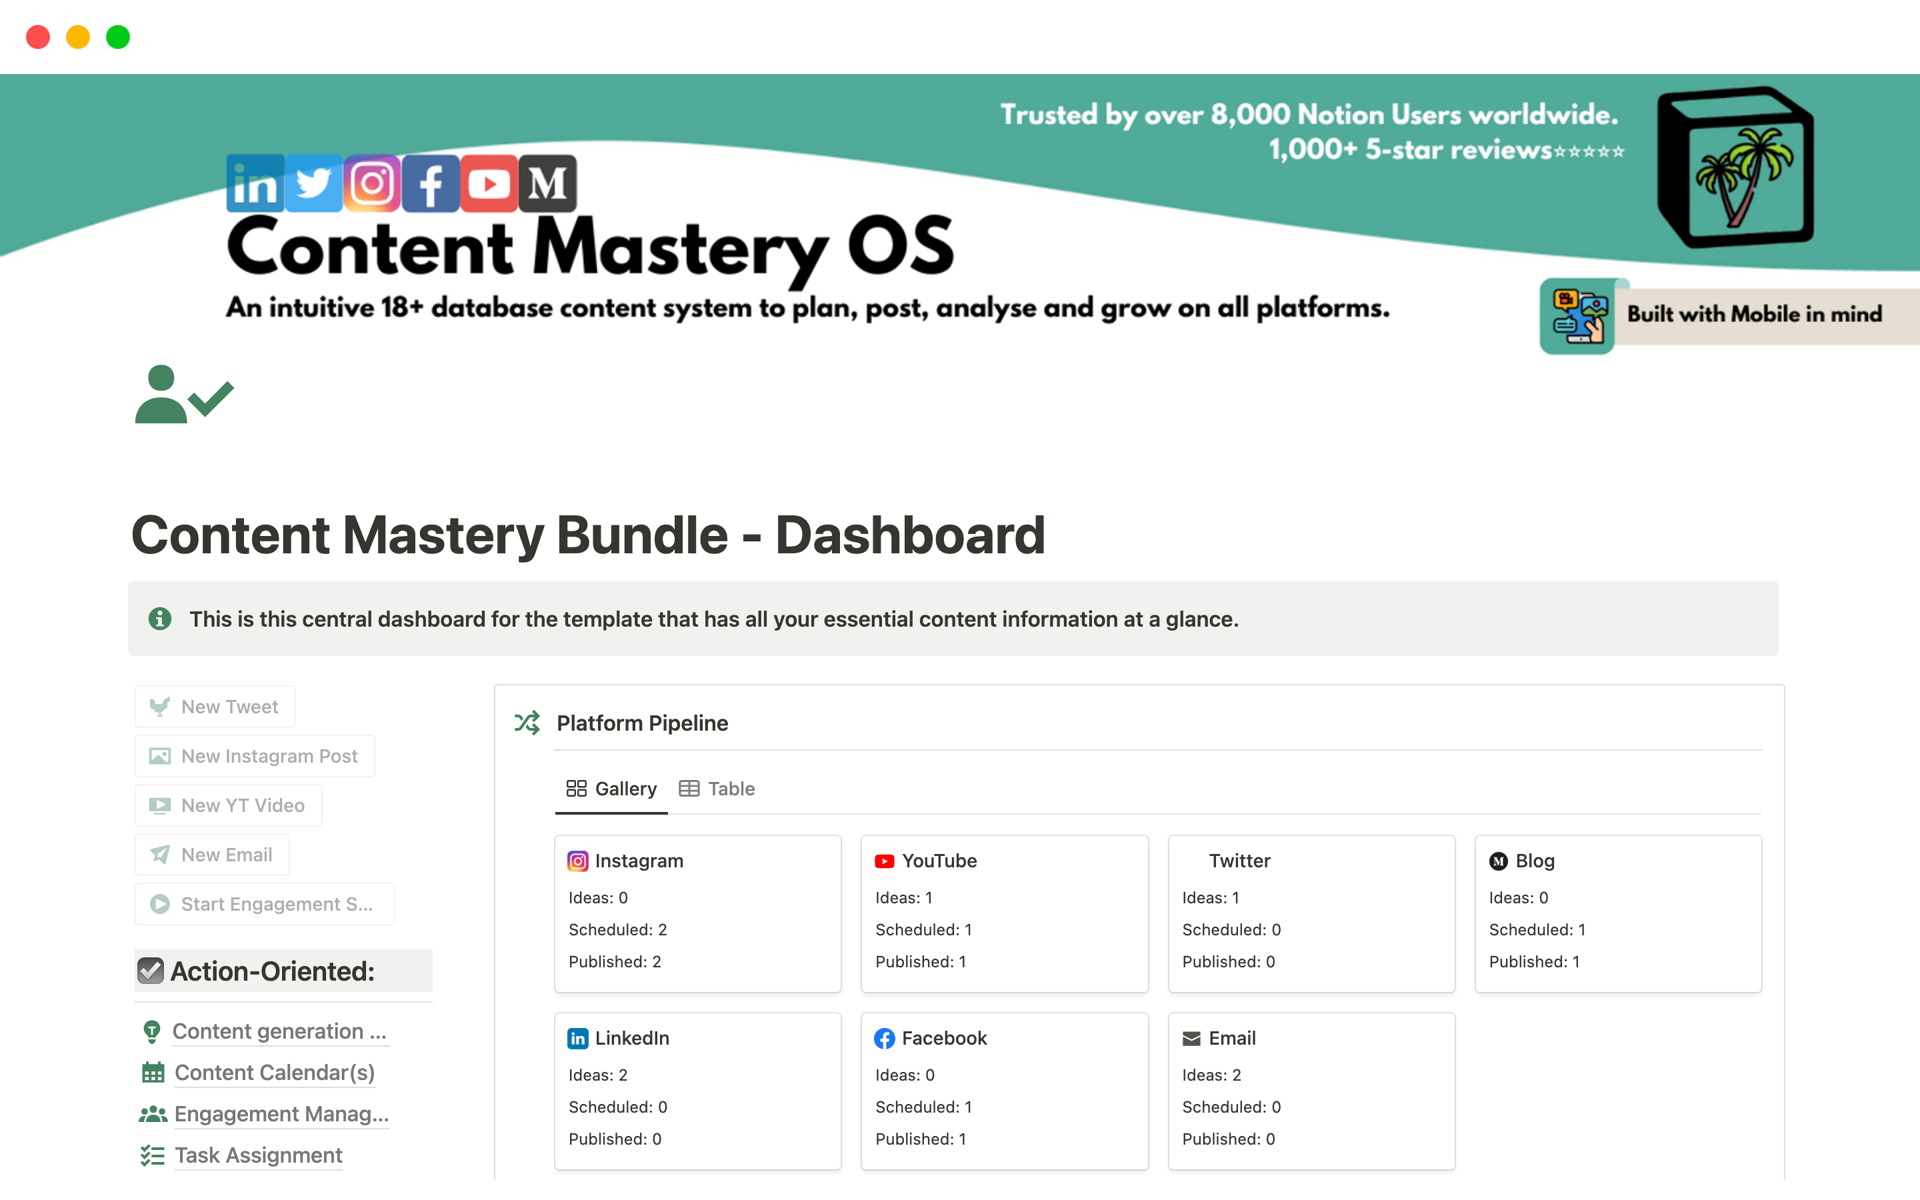 The Content Mastery OS is the system I've used to gain over 10,000 followers across 3 platforms and scale my online business. It is a full-fledged content management powerhouse with everything you need to win online. 